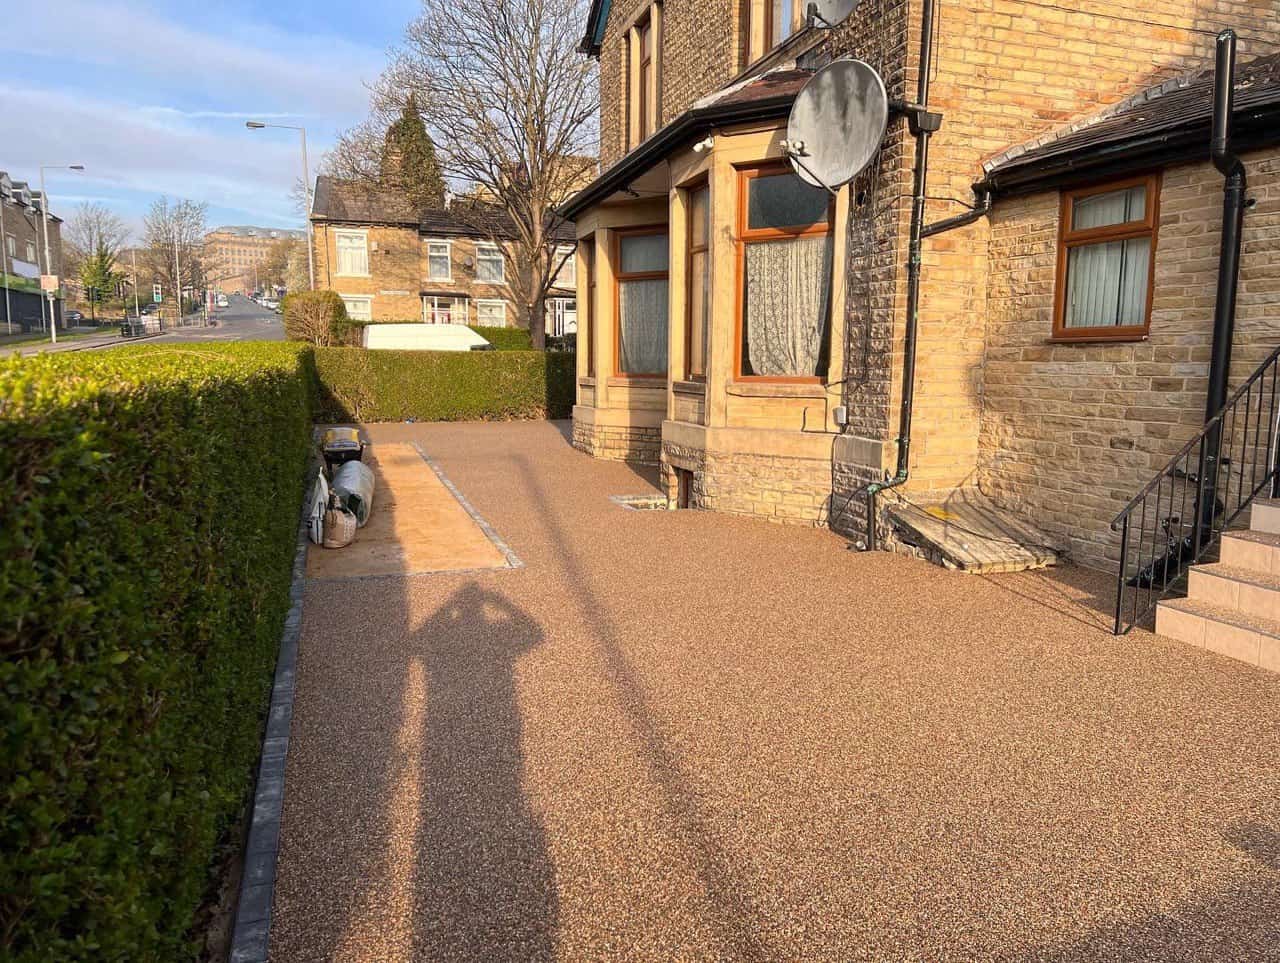 This is a photo of a resin patio installed in Epping Forest by Epping Forest Resin Driveways